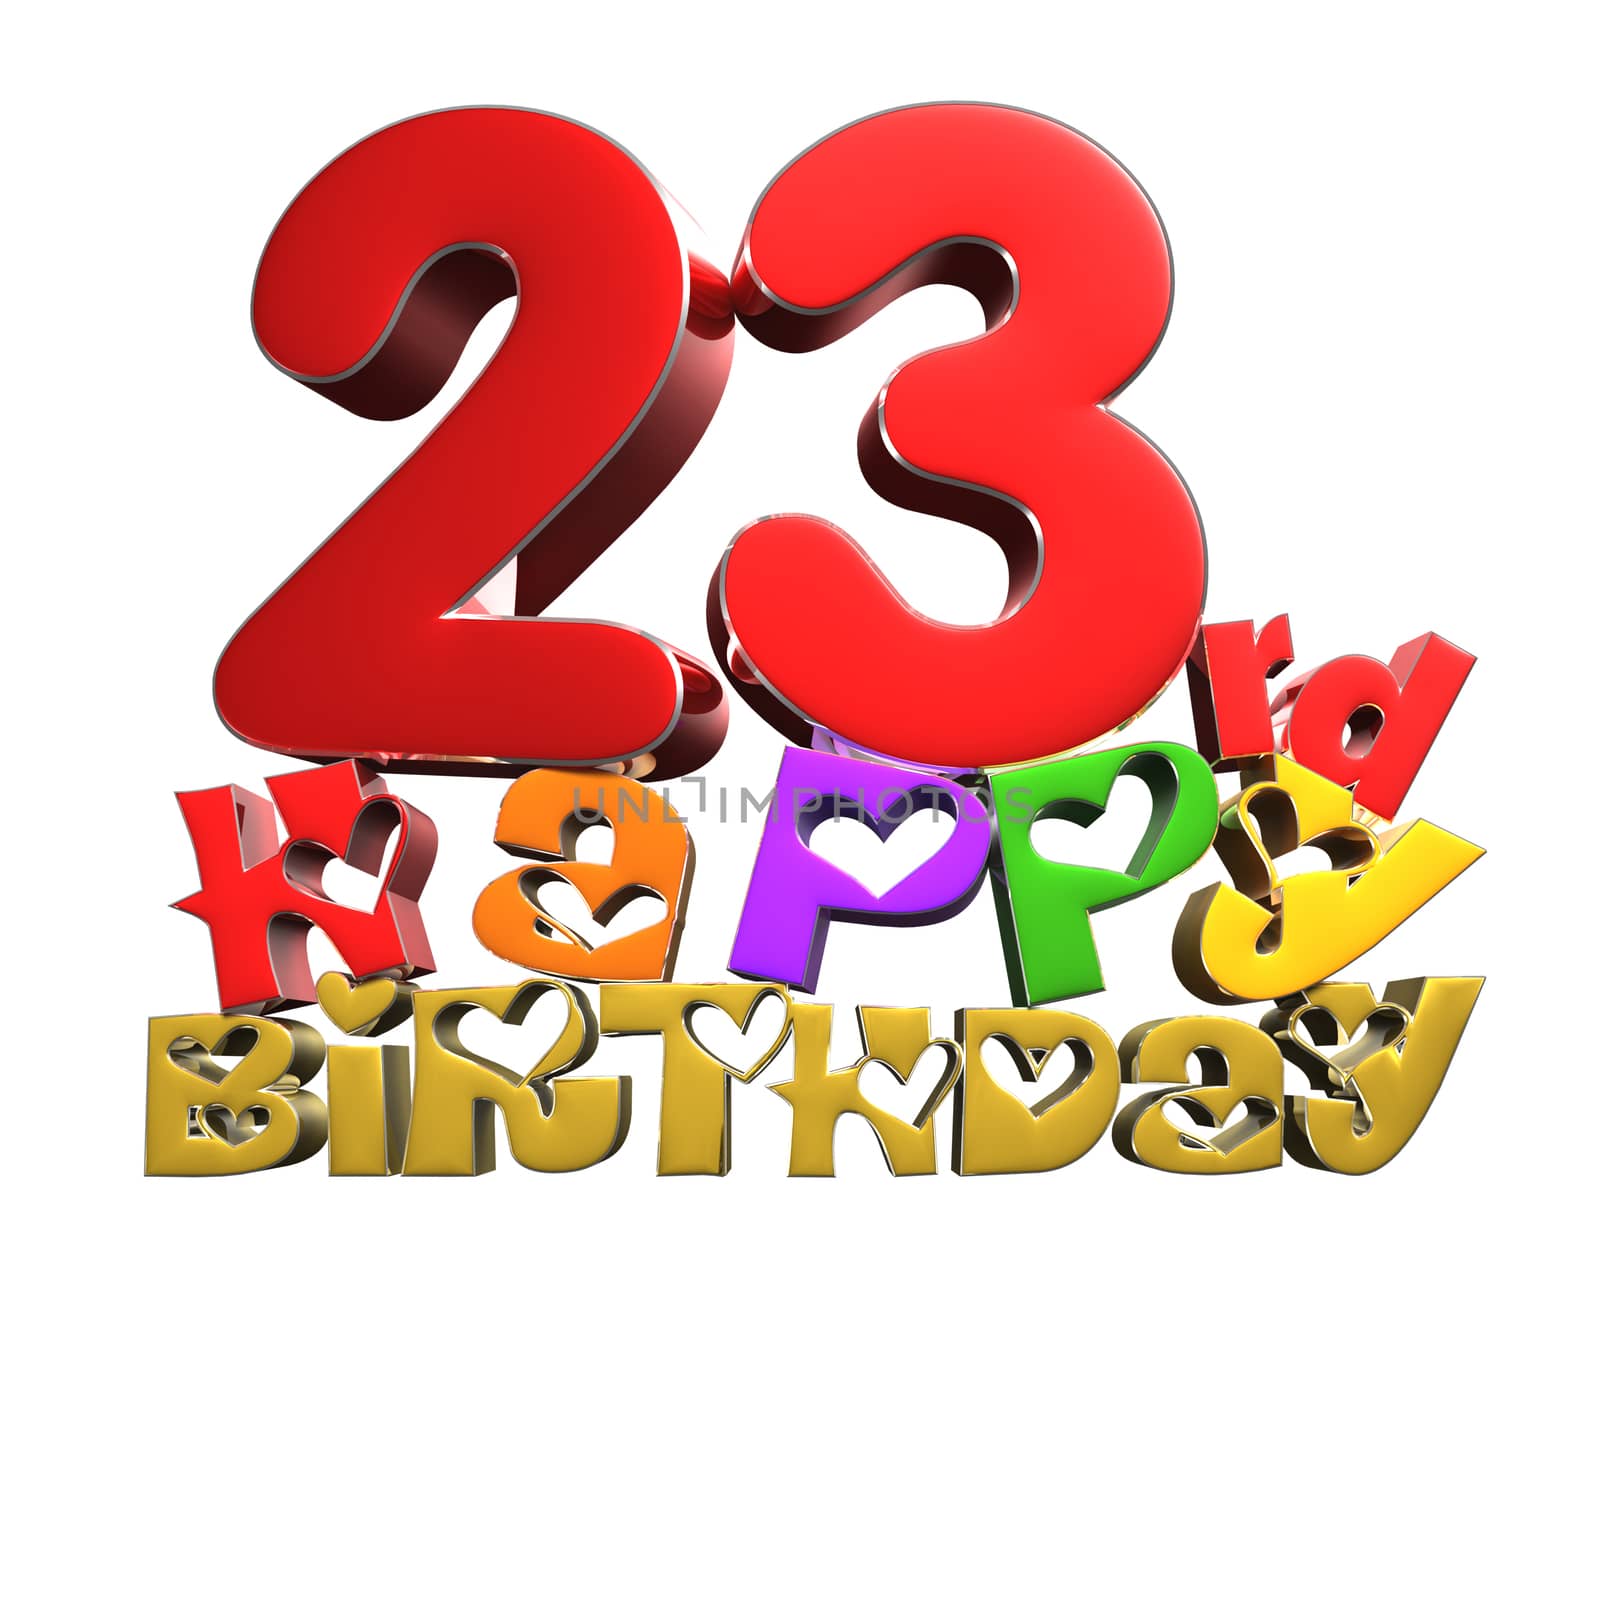 23 rd Happy Birthday 3d rendering on white background.(with Clipping Path).